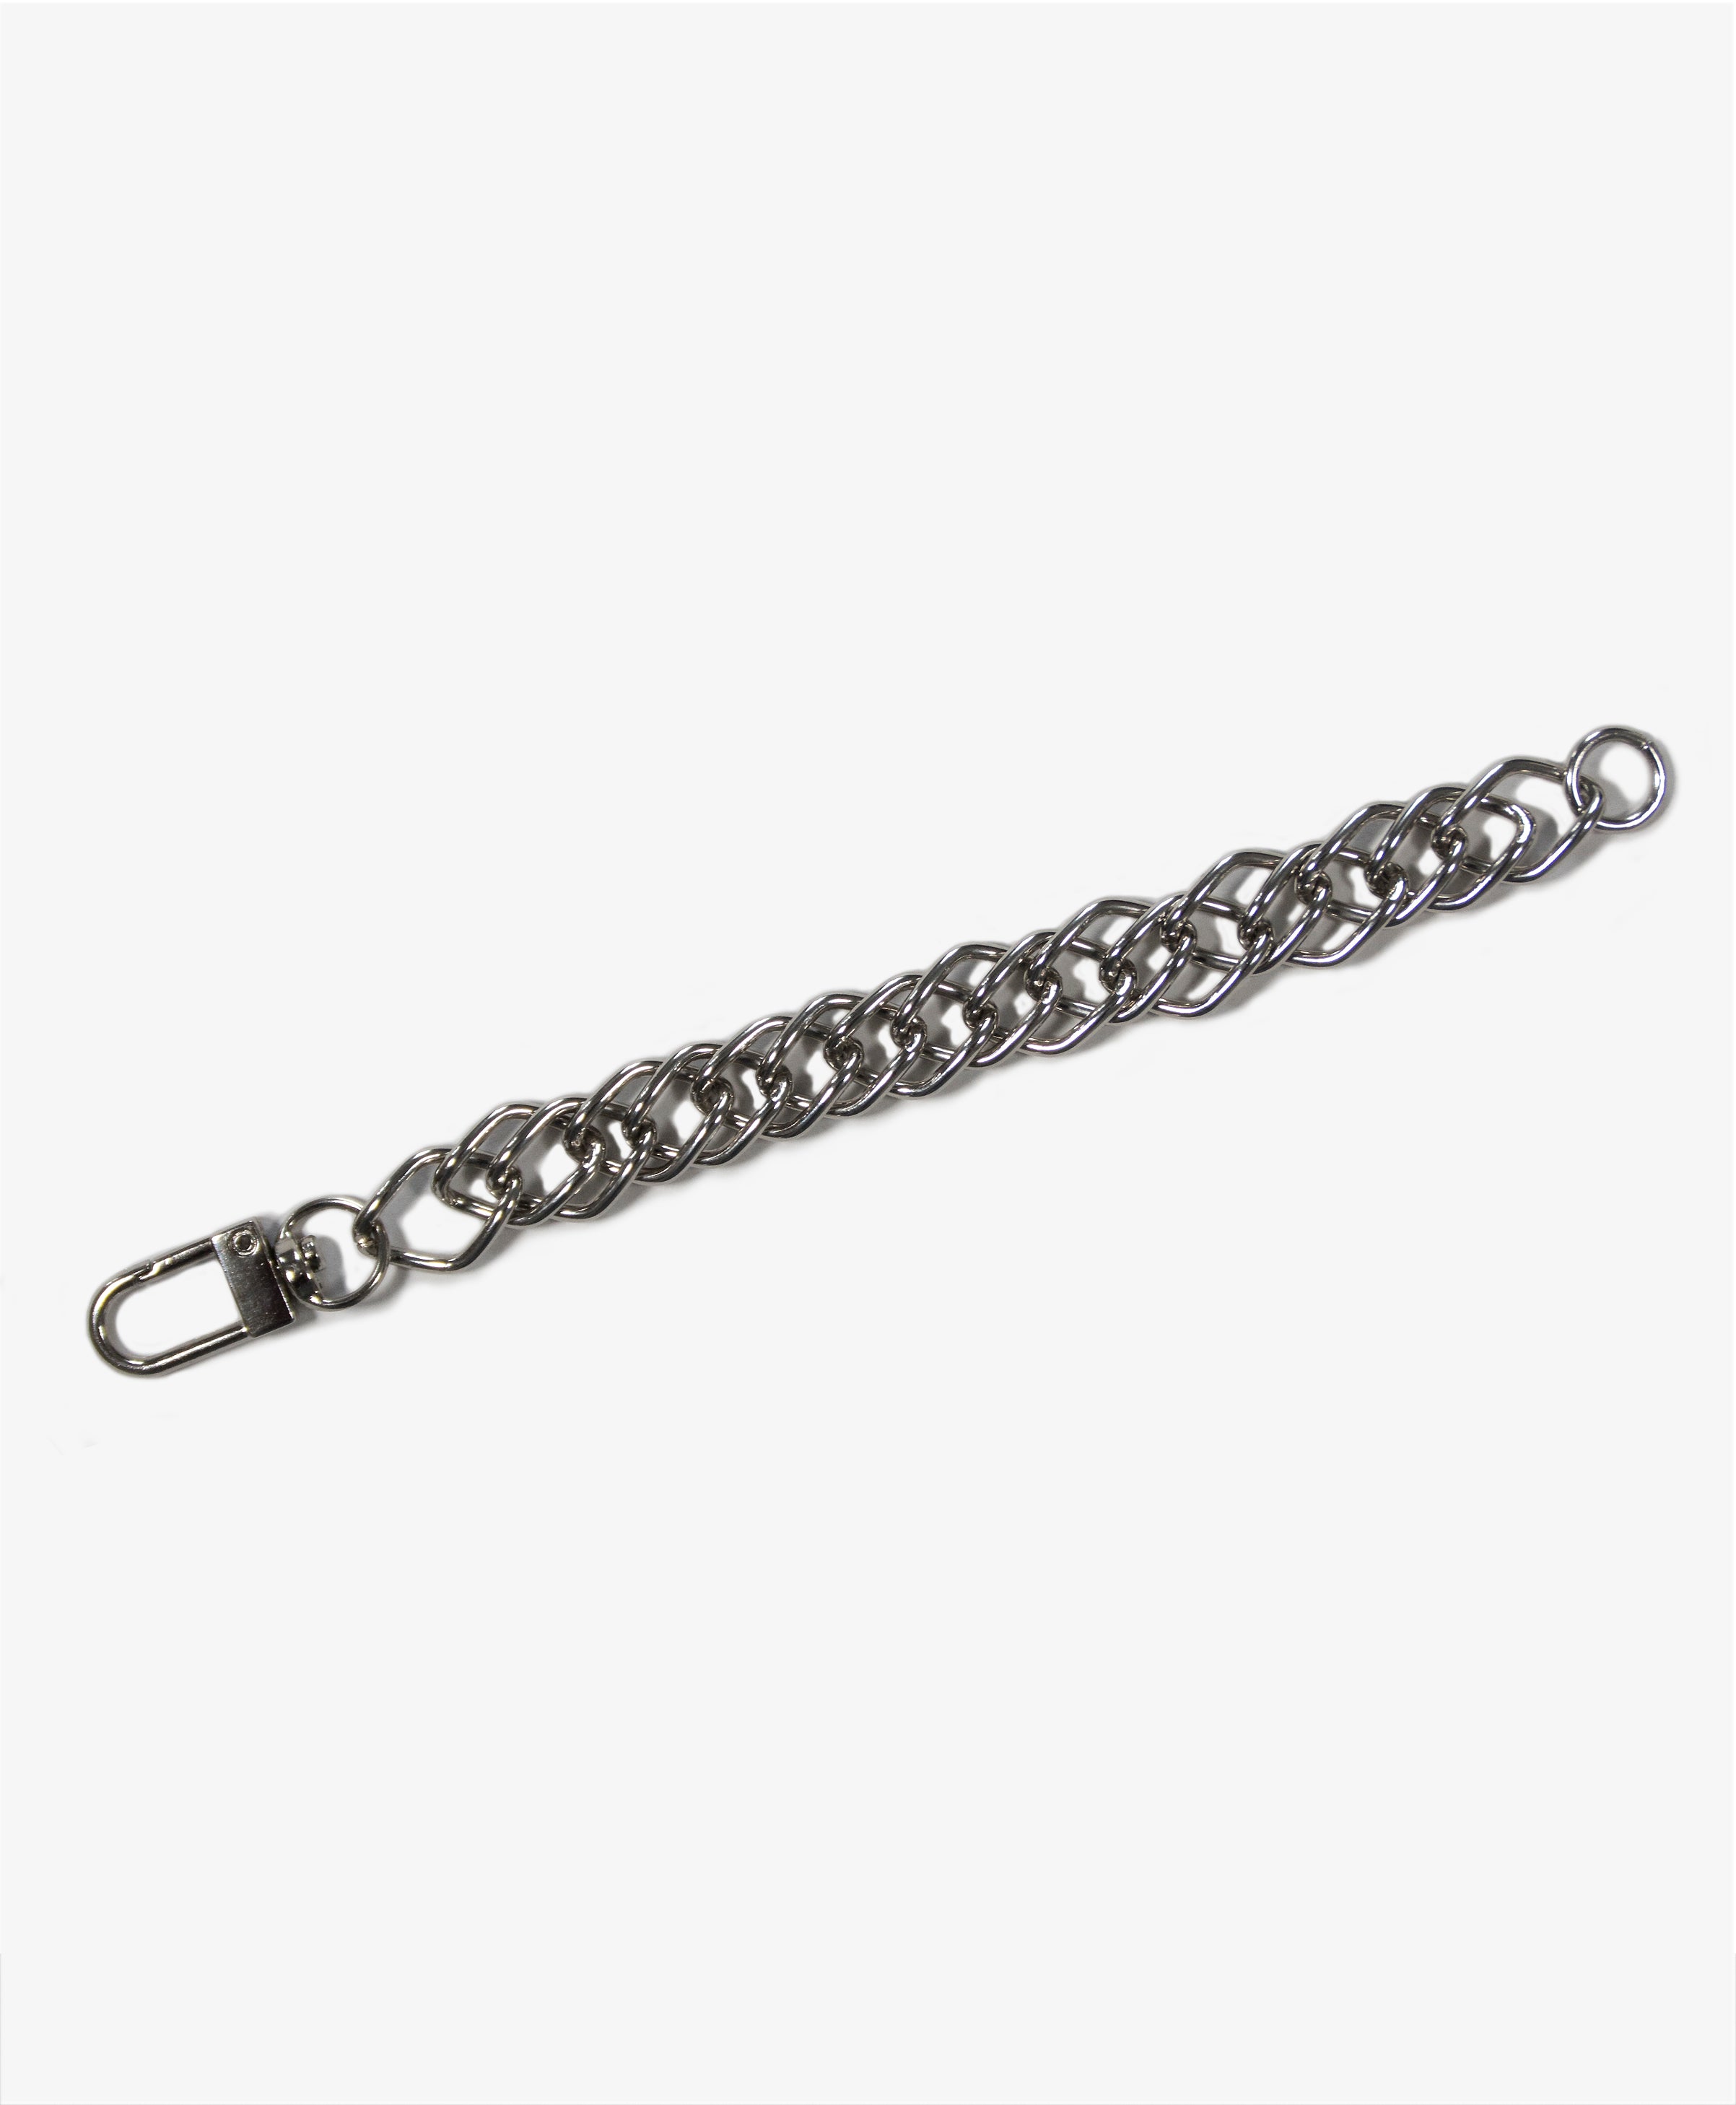 llayers-mens-women-jewelry-silver-stainlesssteel-chain-bracelet-unchained-001-1-New-York-1